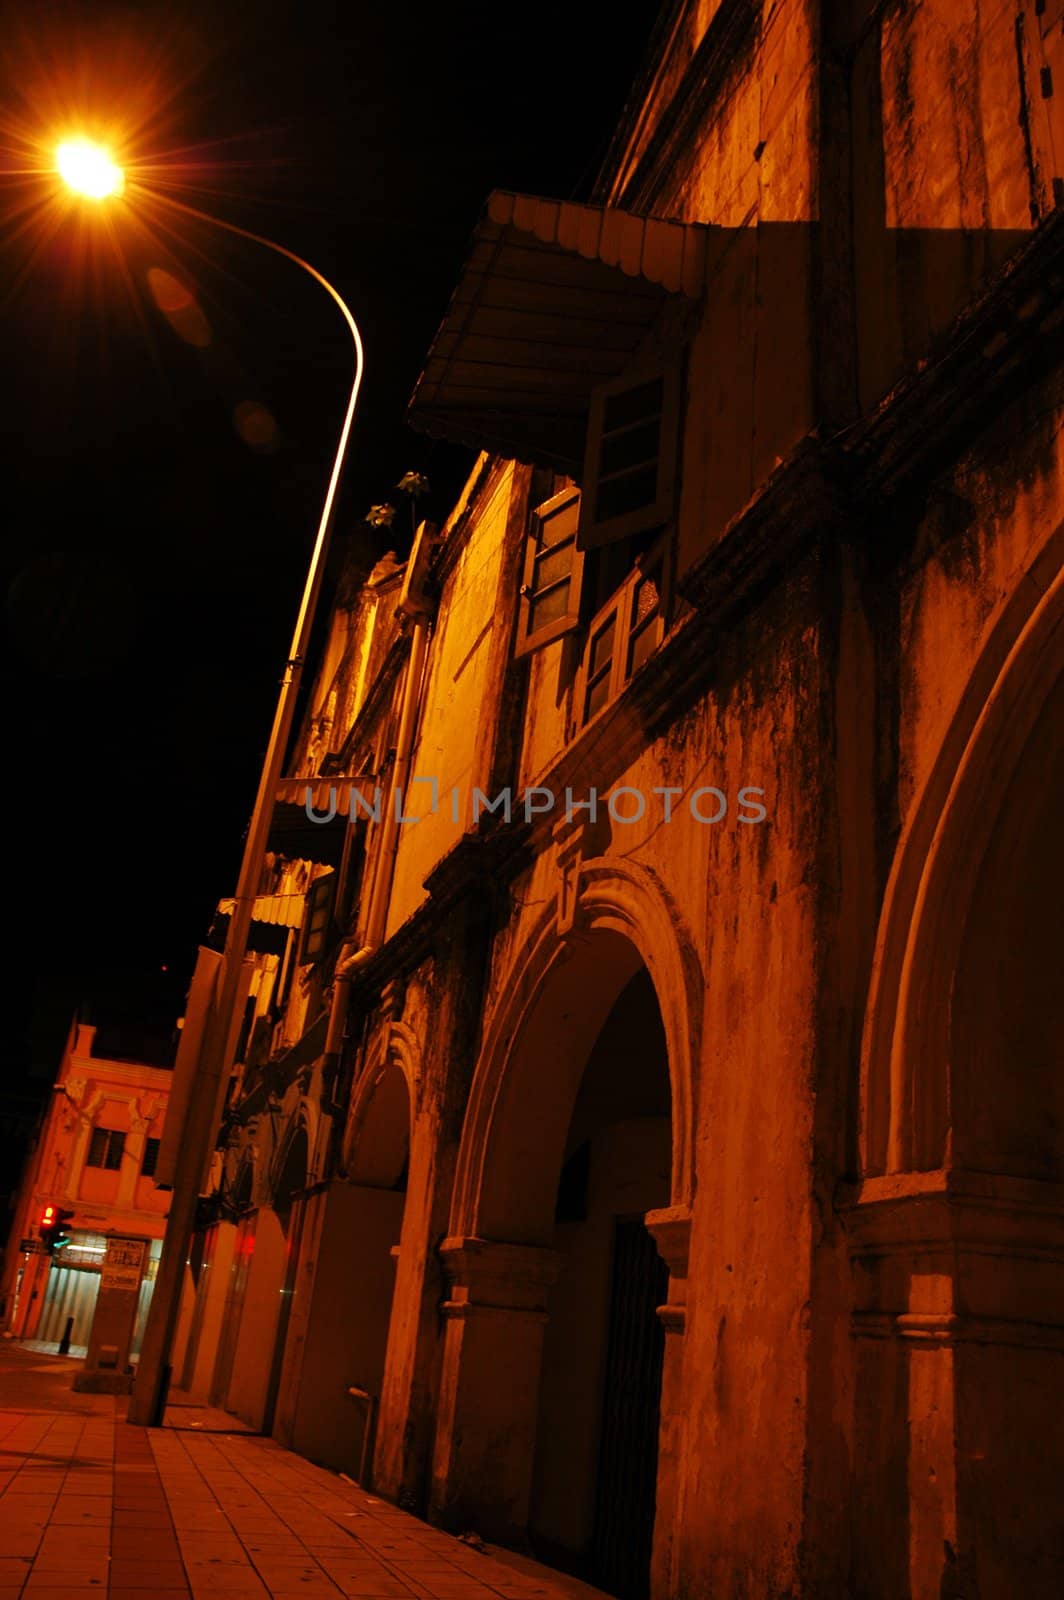 Old shophouses at night shot in perspective